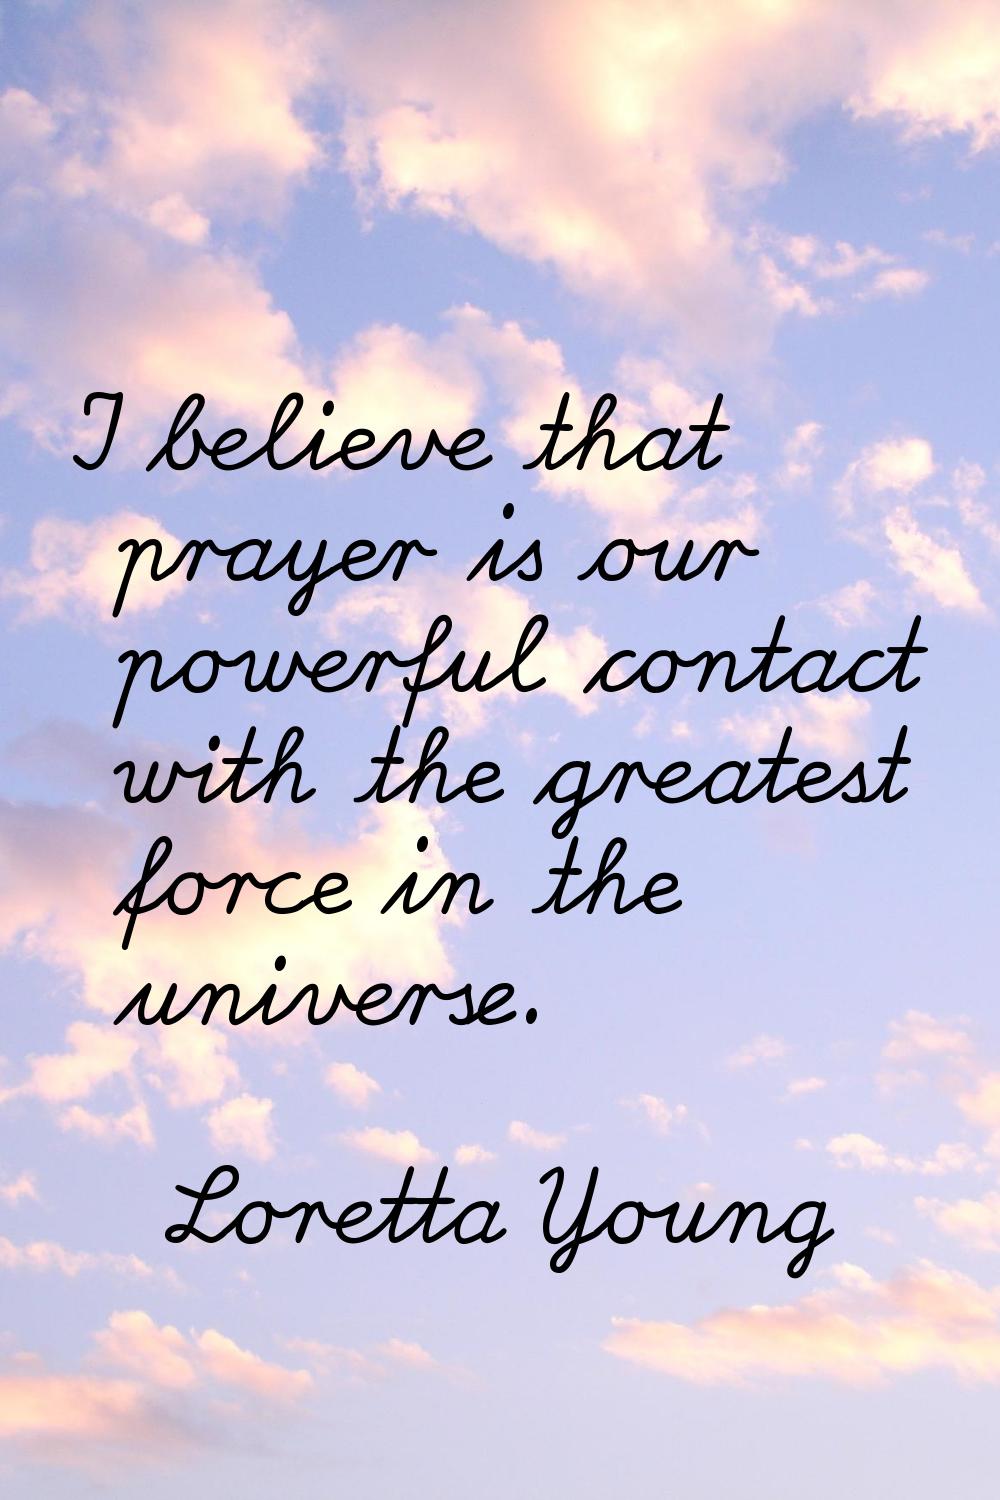 I believe that prayer is our powerful contact with the greatest force in the universe.